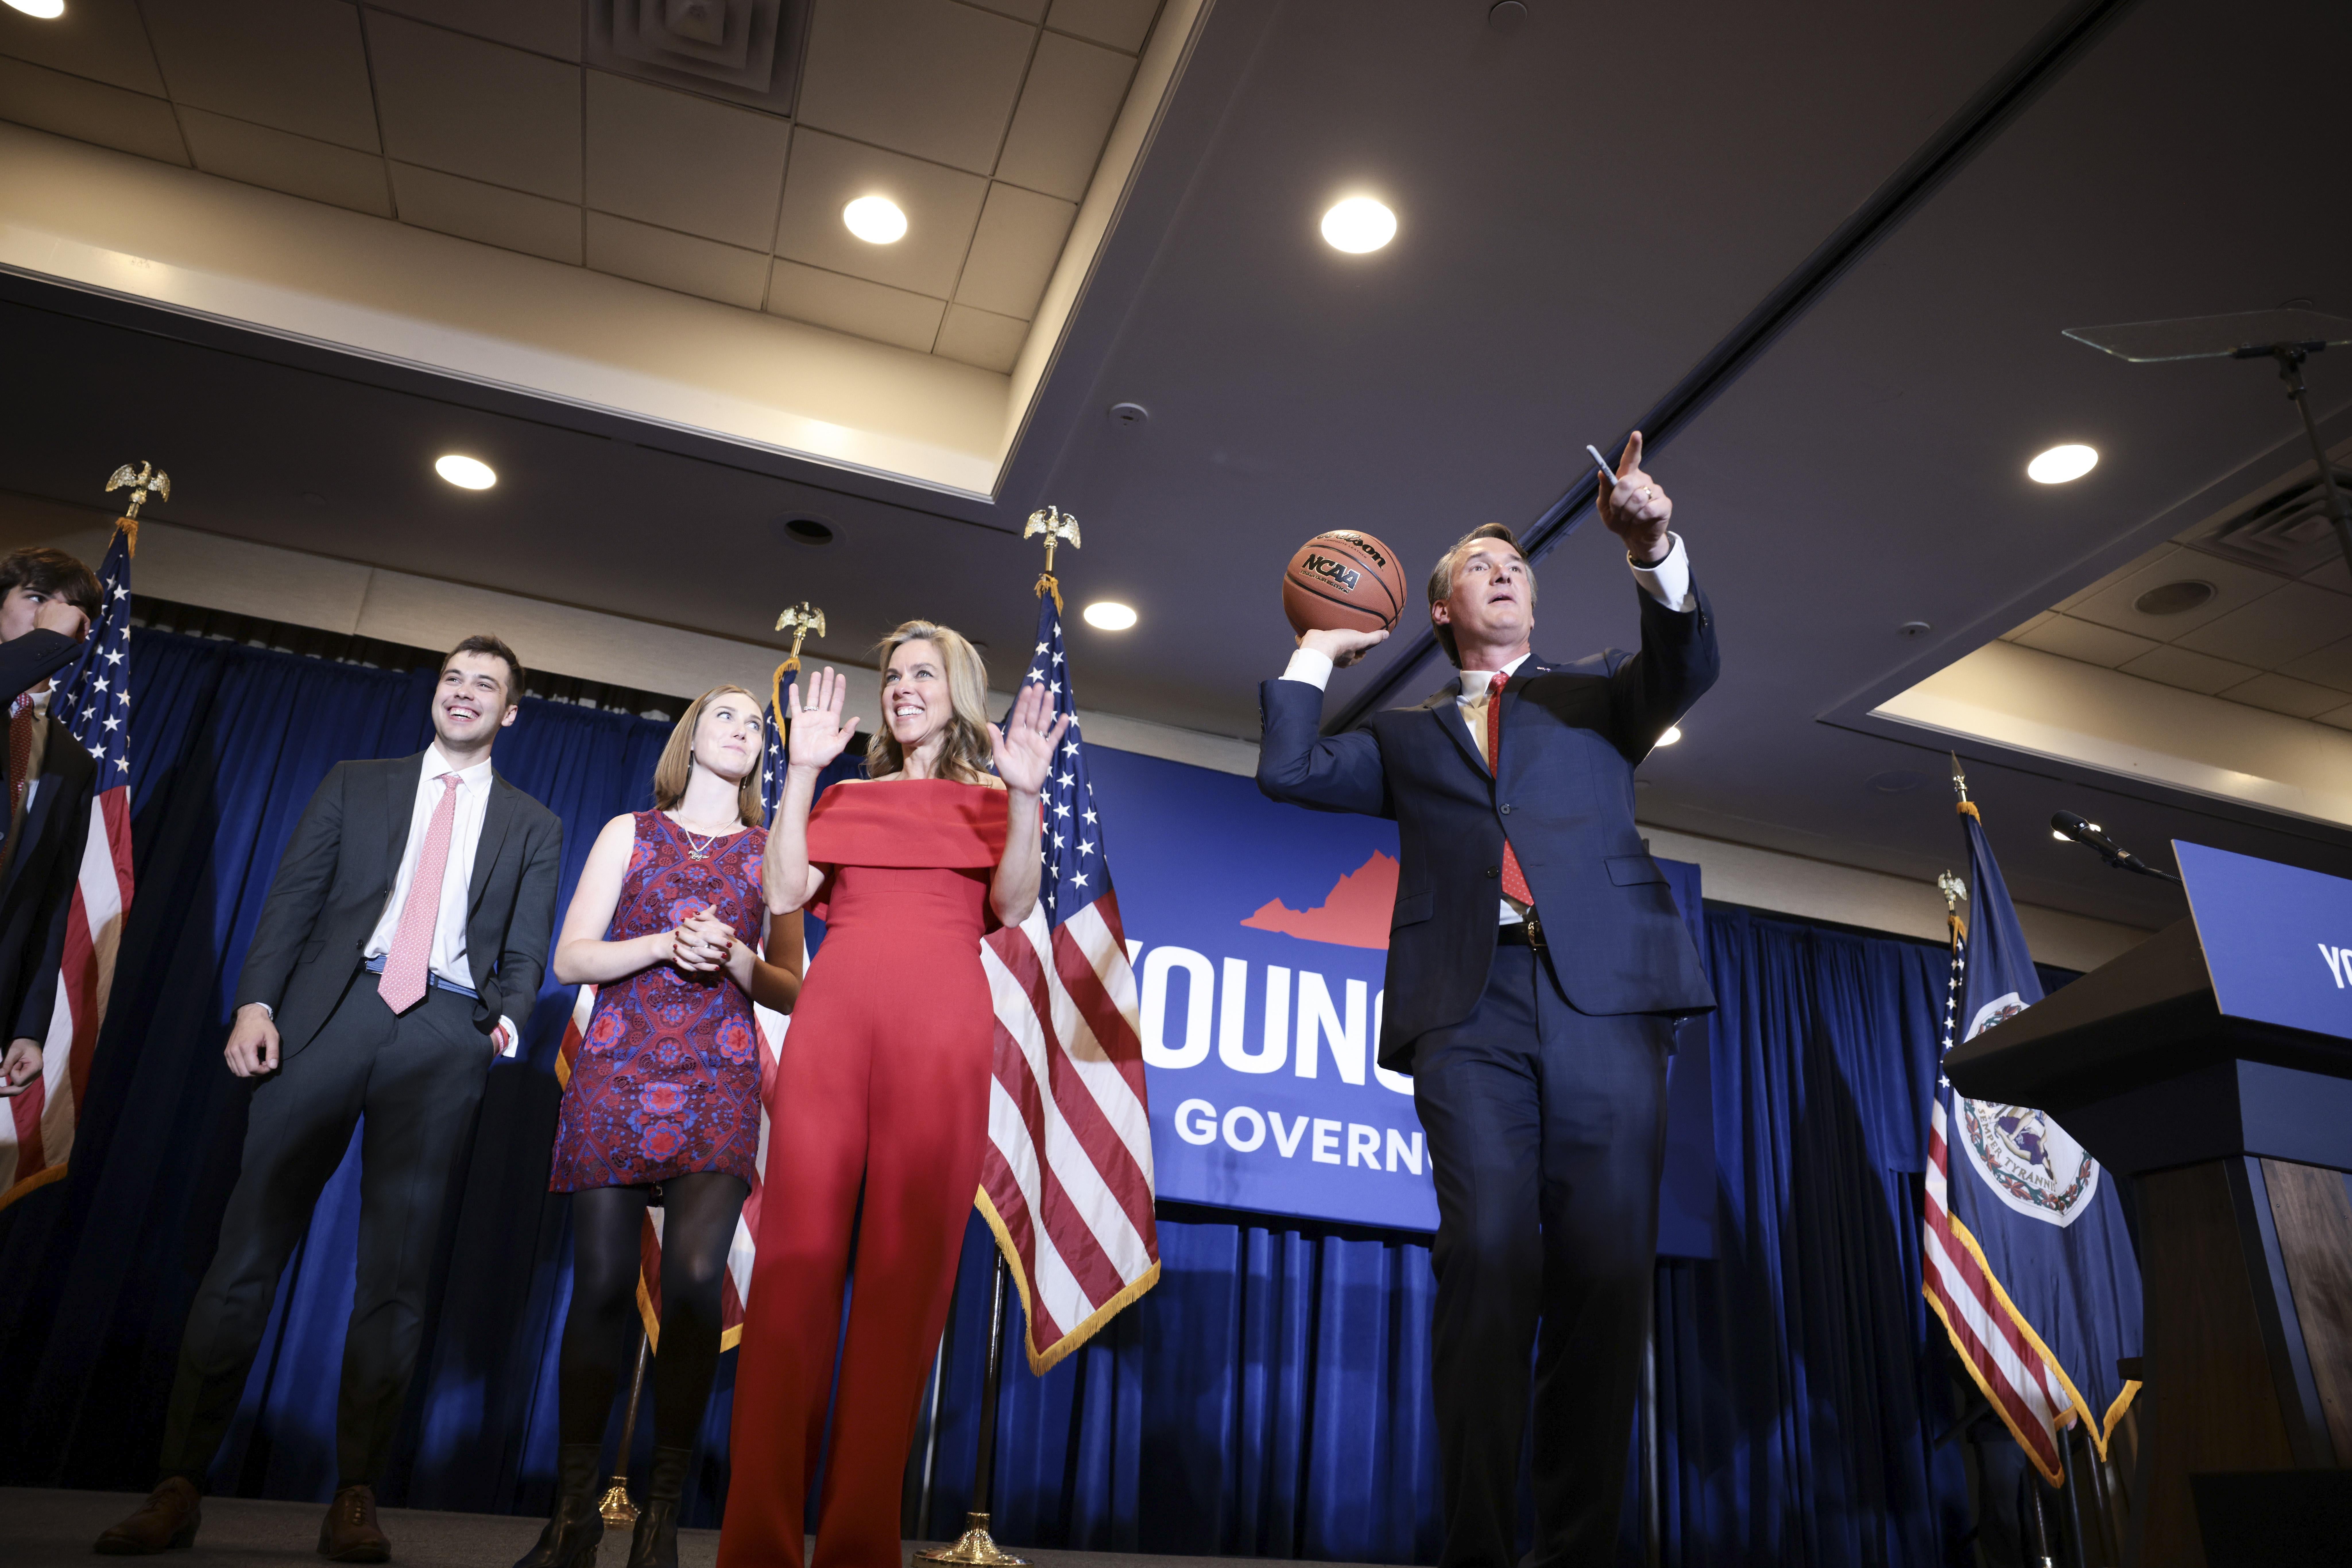 CHANTILLY, VIRGINIA - NOVEMBER 02 :Virginia Republican gubernatorial candidate Glenn Youngkin passes an autographed basketball into the crowd with his family at his election night rally at the Westfields Marriott Washington Dulles on November 02, 2021 in Chantilly, Virginia. Virginians went to the polls Tuesday to vote in the gubernatorial race that pitted Youngkin against Democratic gubernatorial candidate, former Virginia Gov. Terry McAuliffe. (Photo by Anna Moneymaker/Getty Images)